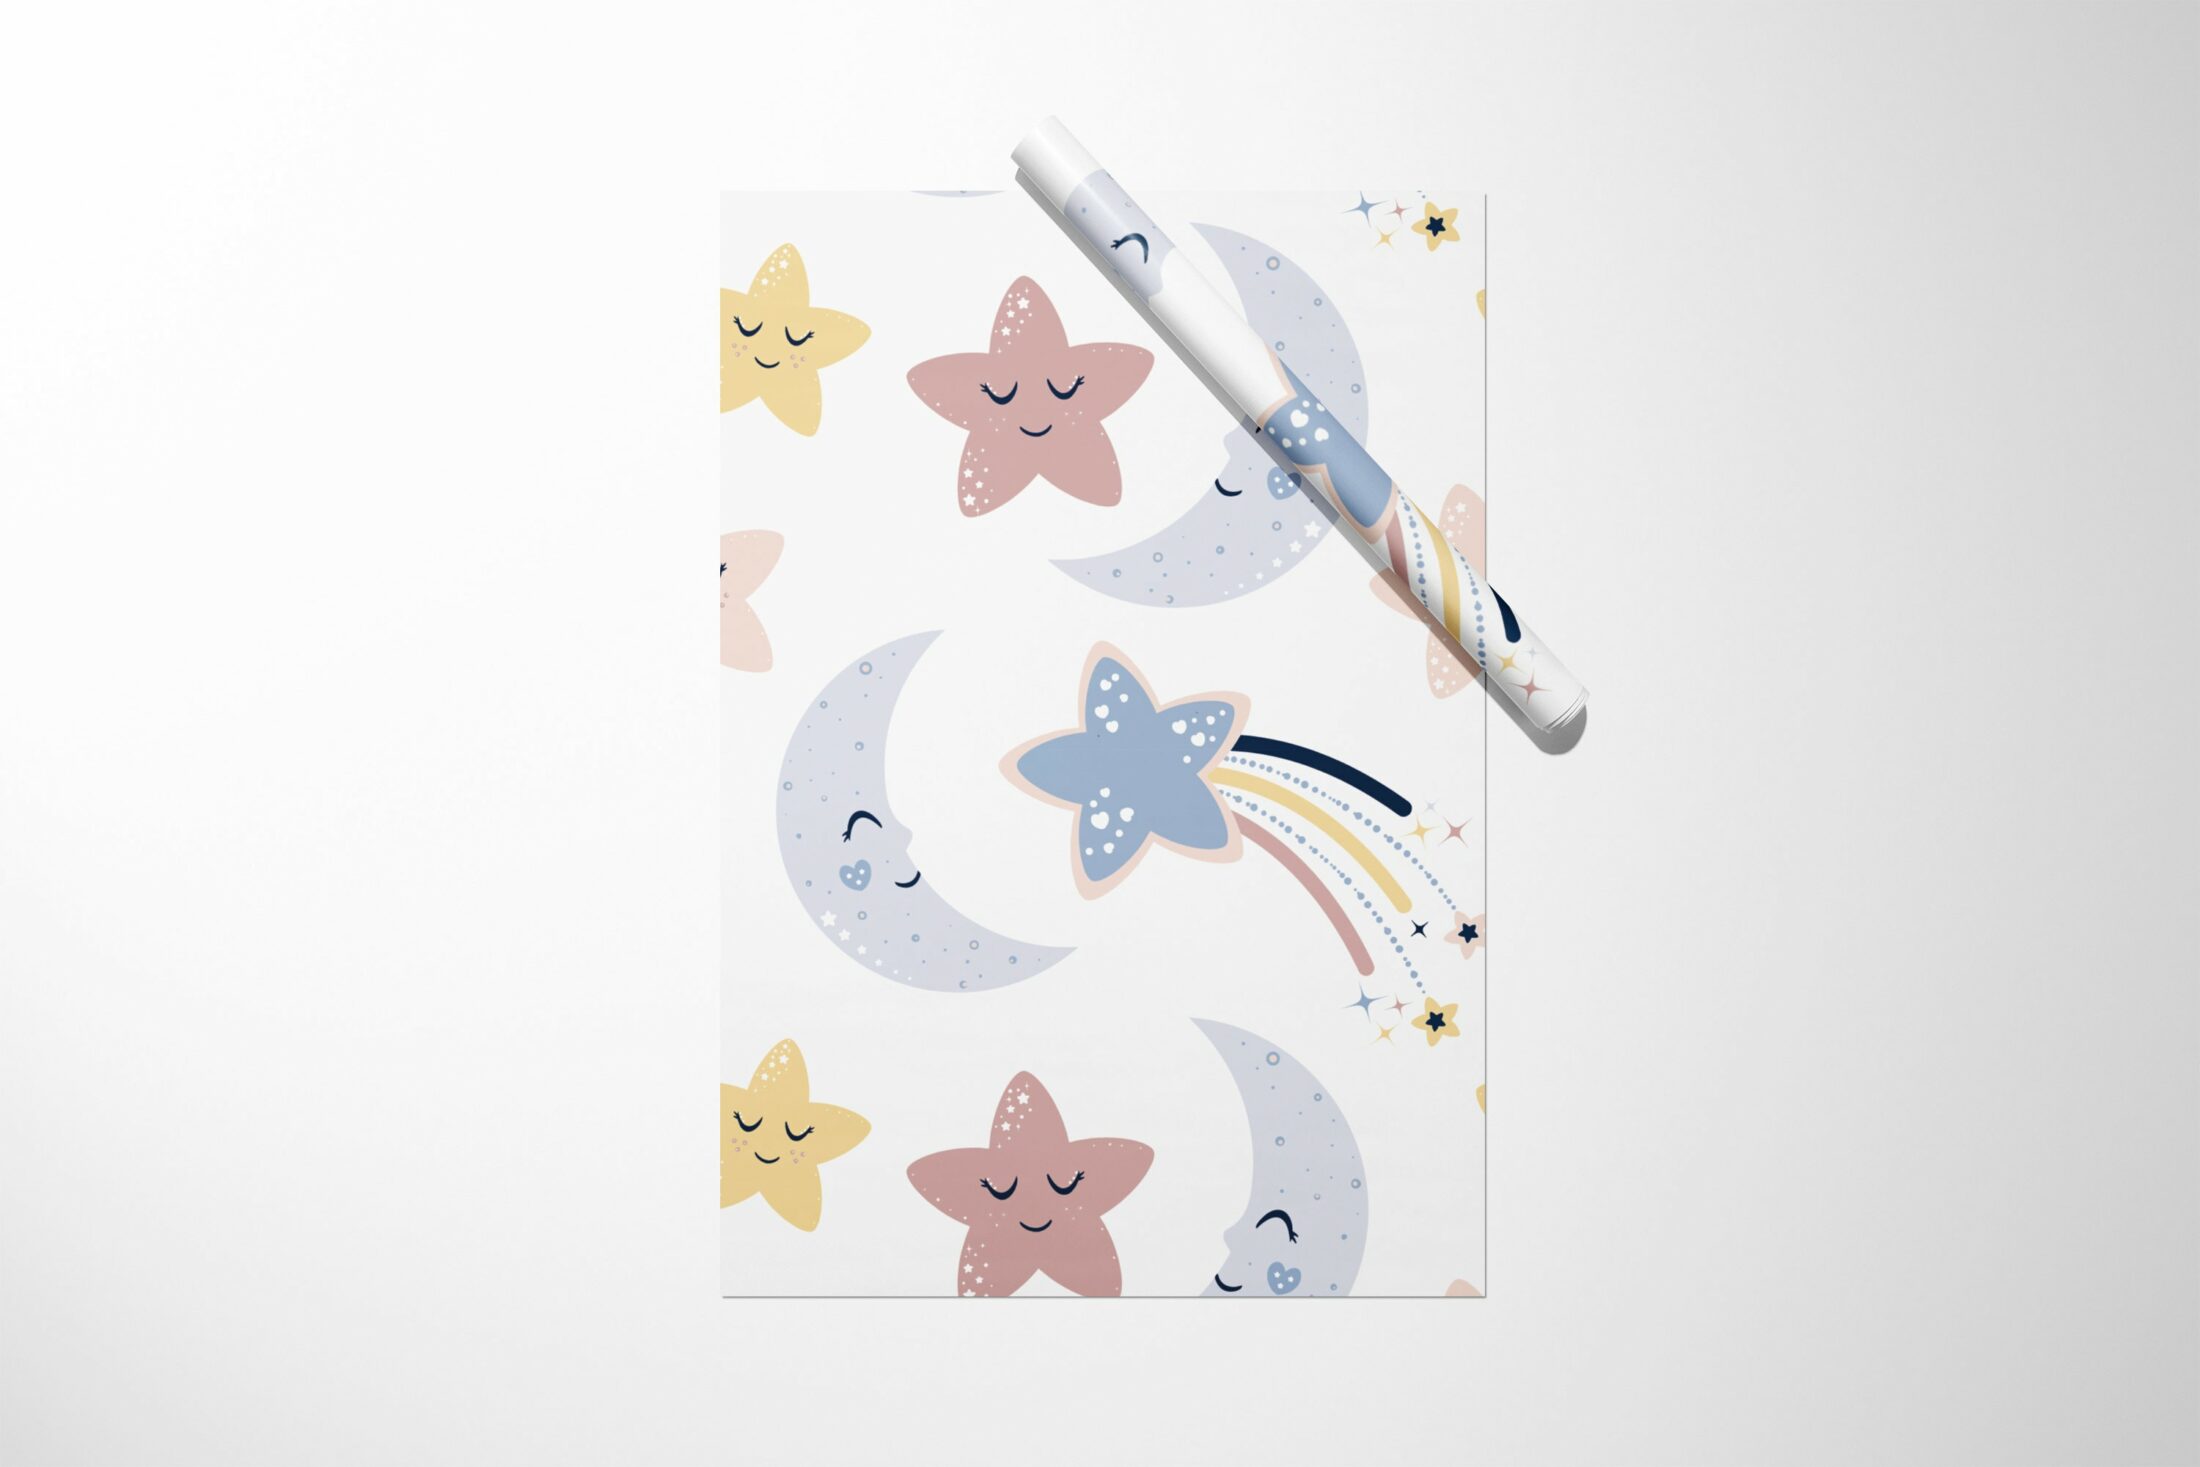 A Moon and Stars Wrapping Paper with stars and moons on it, perfect for Christmas gifting.